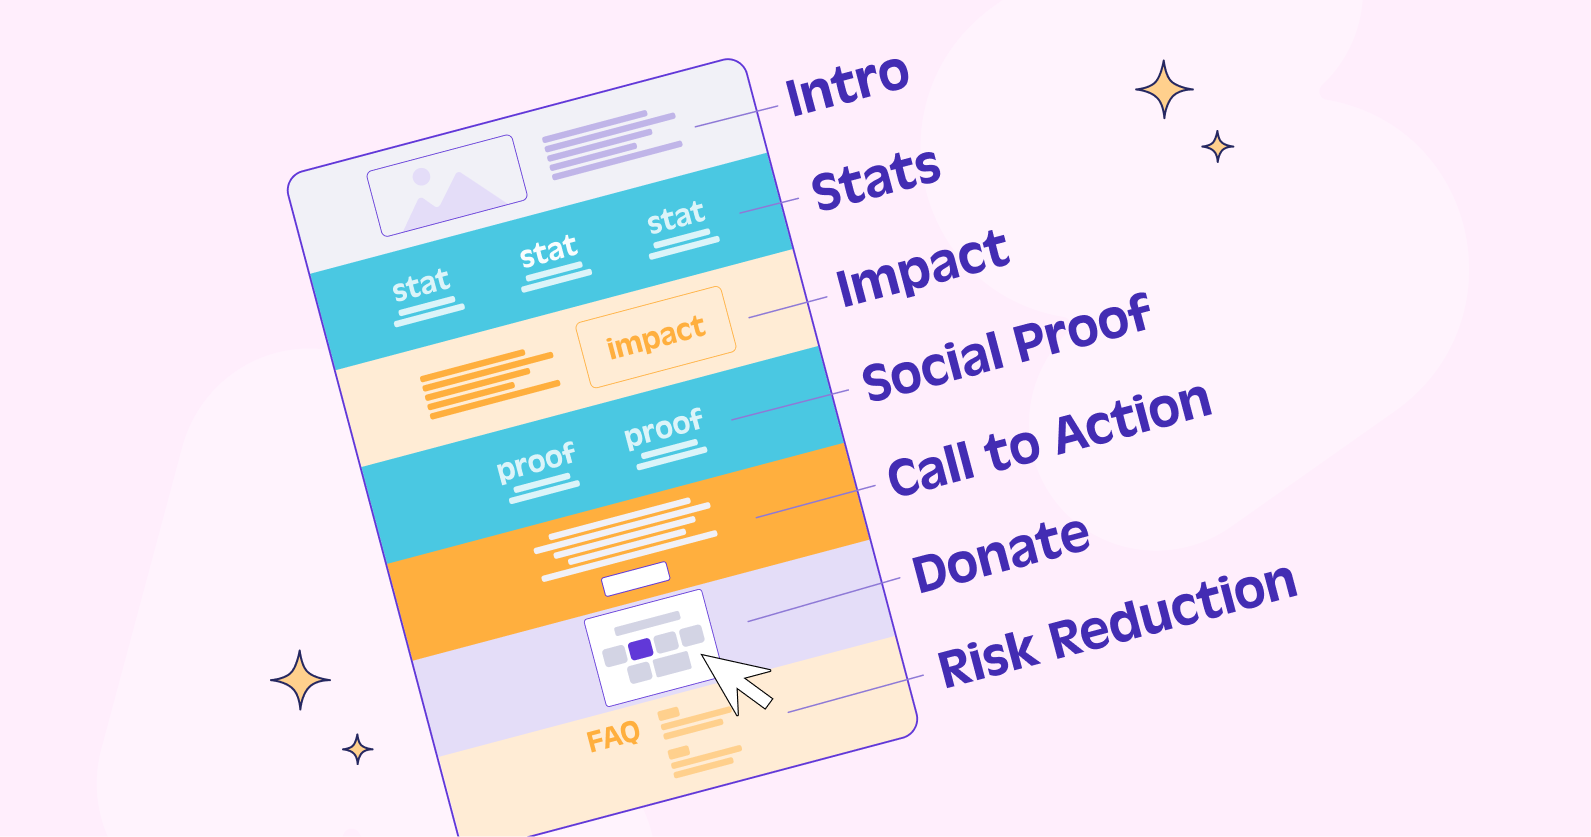 Appeal page story structure including intro, stats, impact, social proof, call to action, donate and risk reduction.